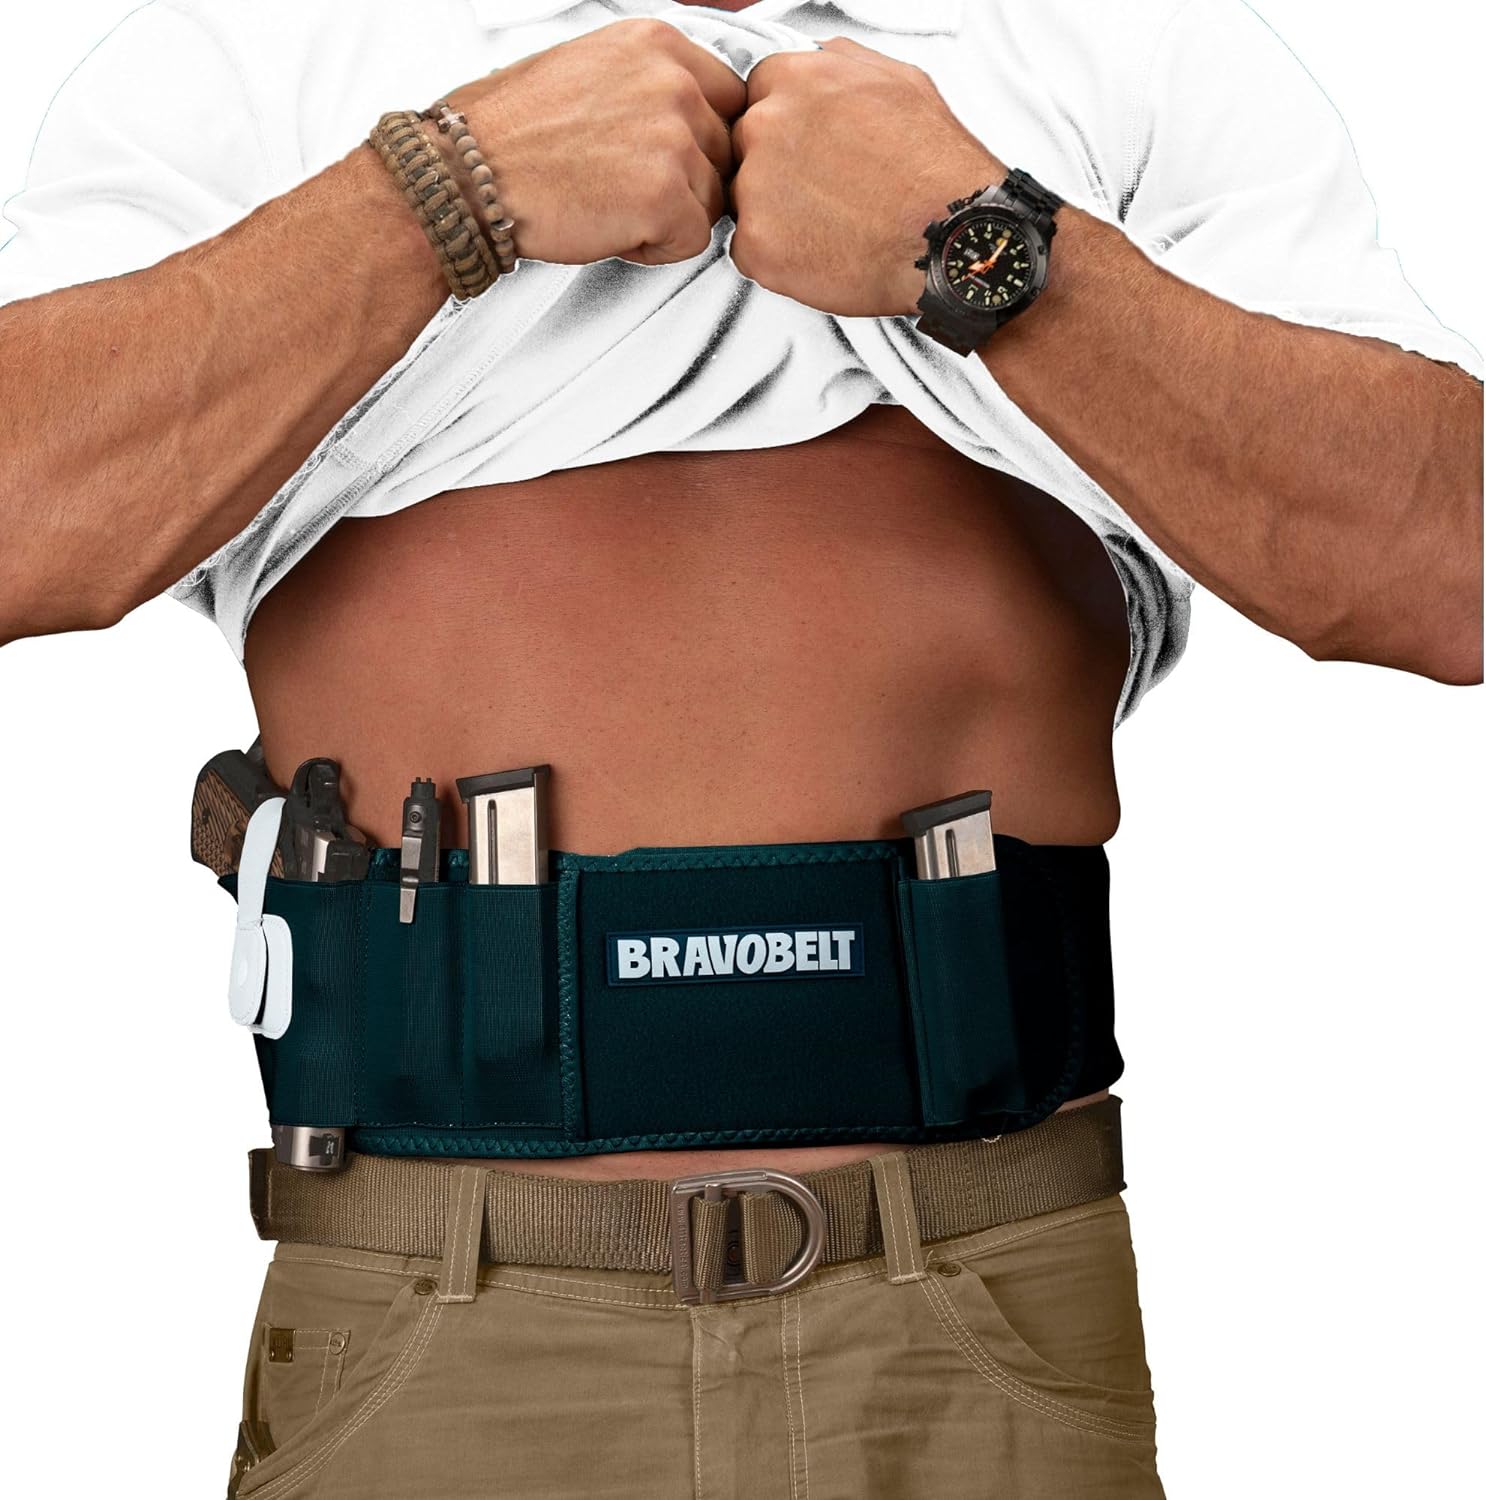 Buy Belly Band Holster Concealed Carry Waistband Holsters with 2